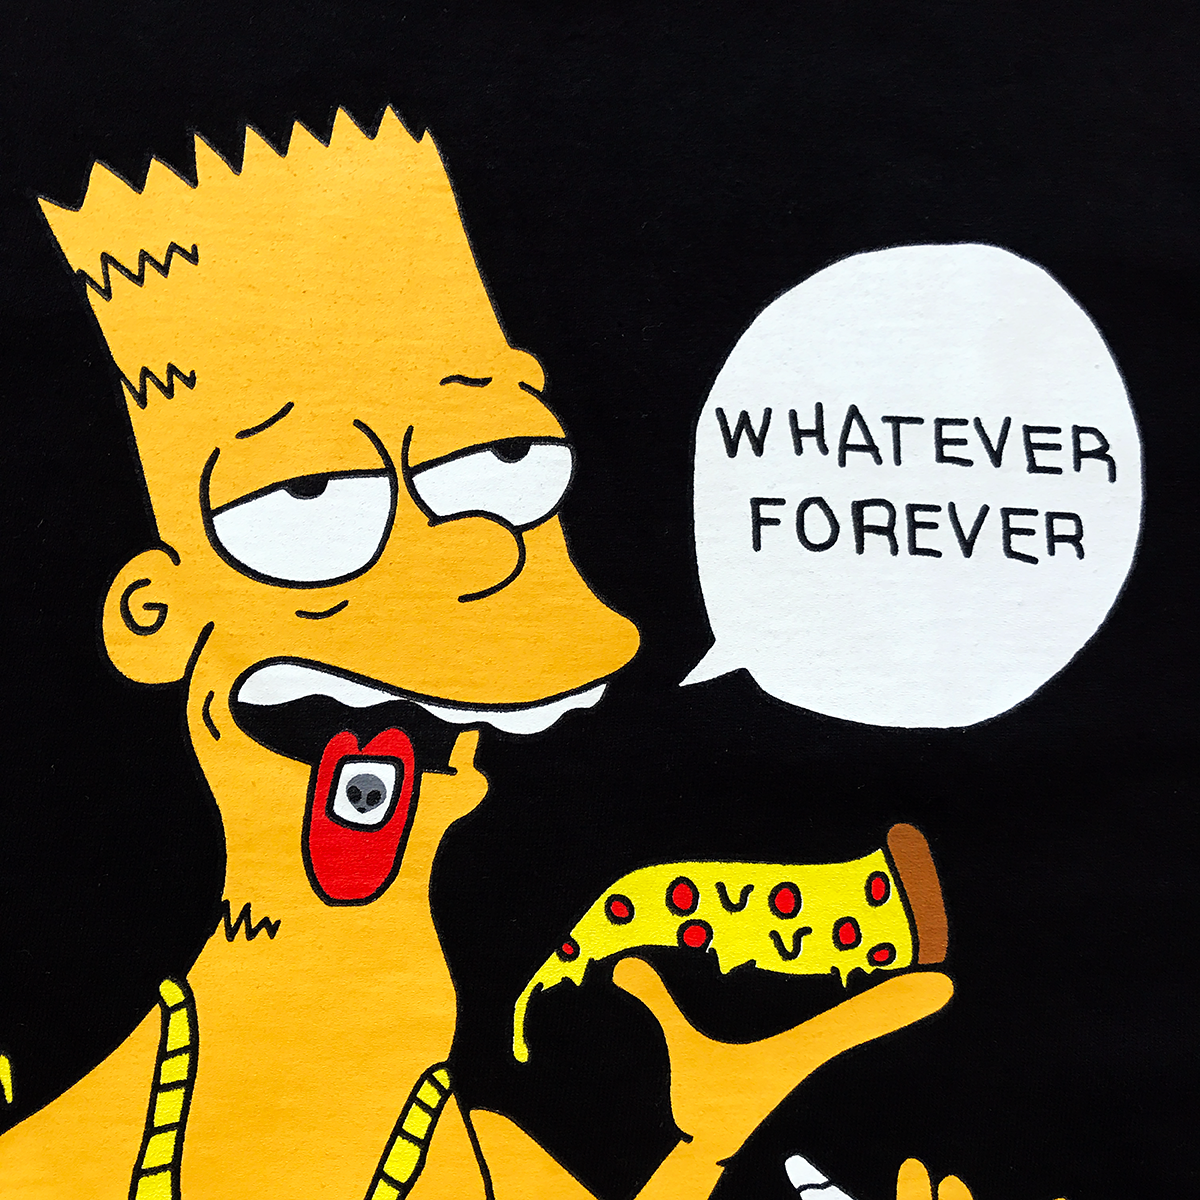 The "Whatever Forever" Fucked Up 6 Armed Bart T-Shirt